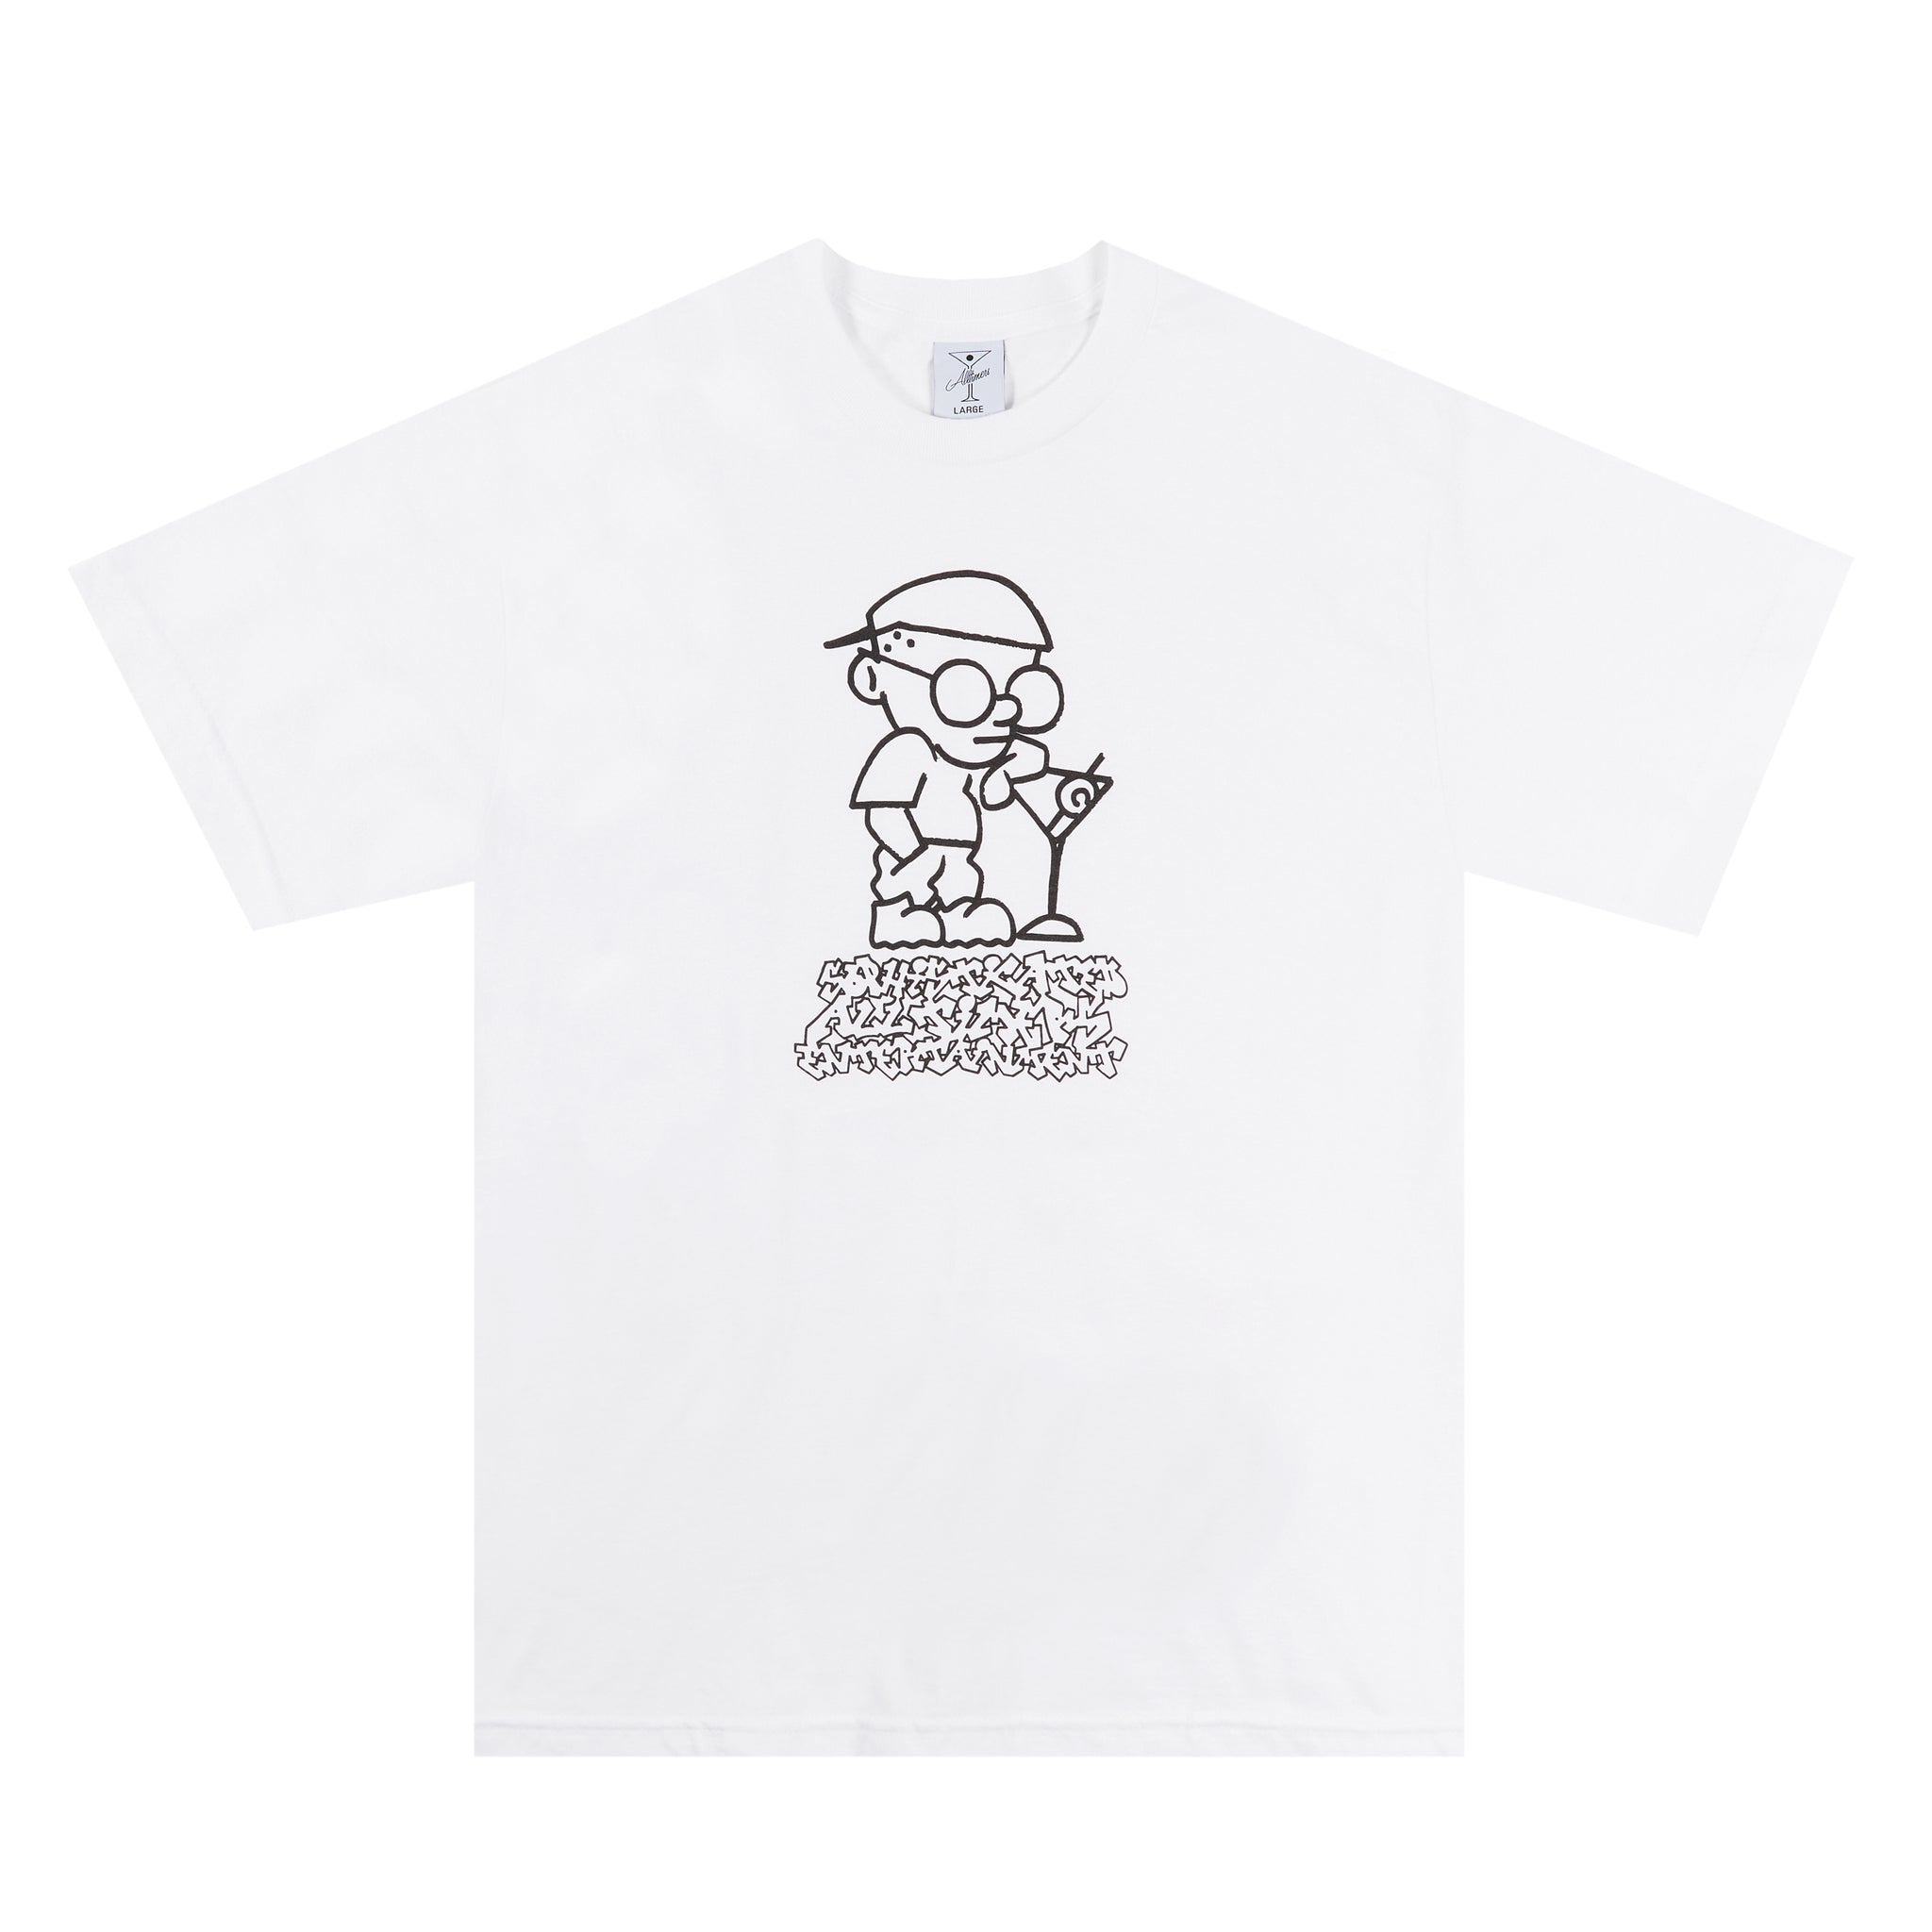 ALLTIMERS x Bronze - Sophisticated T-Shirt "White"